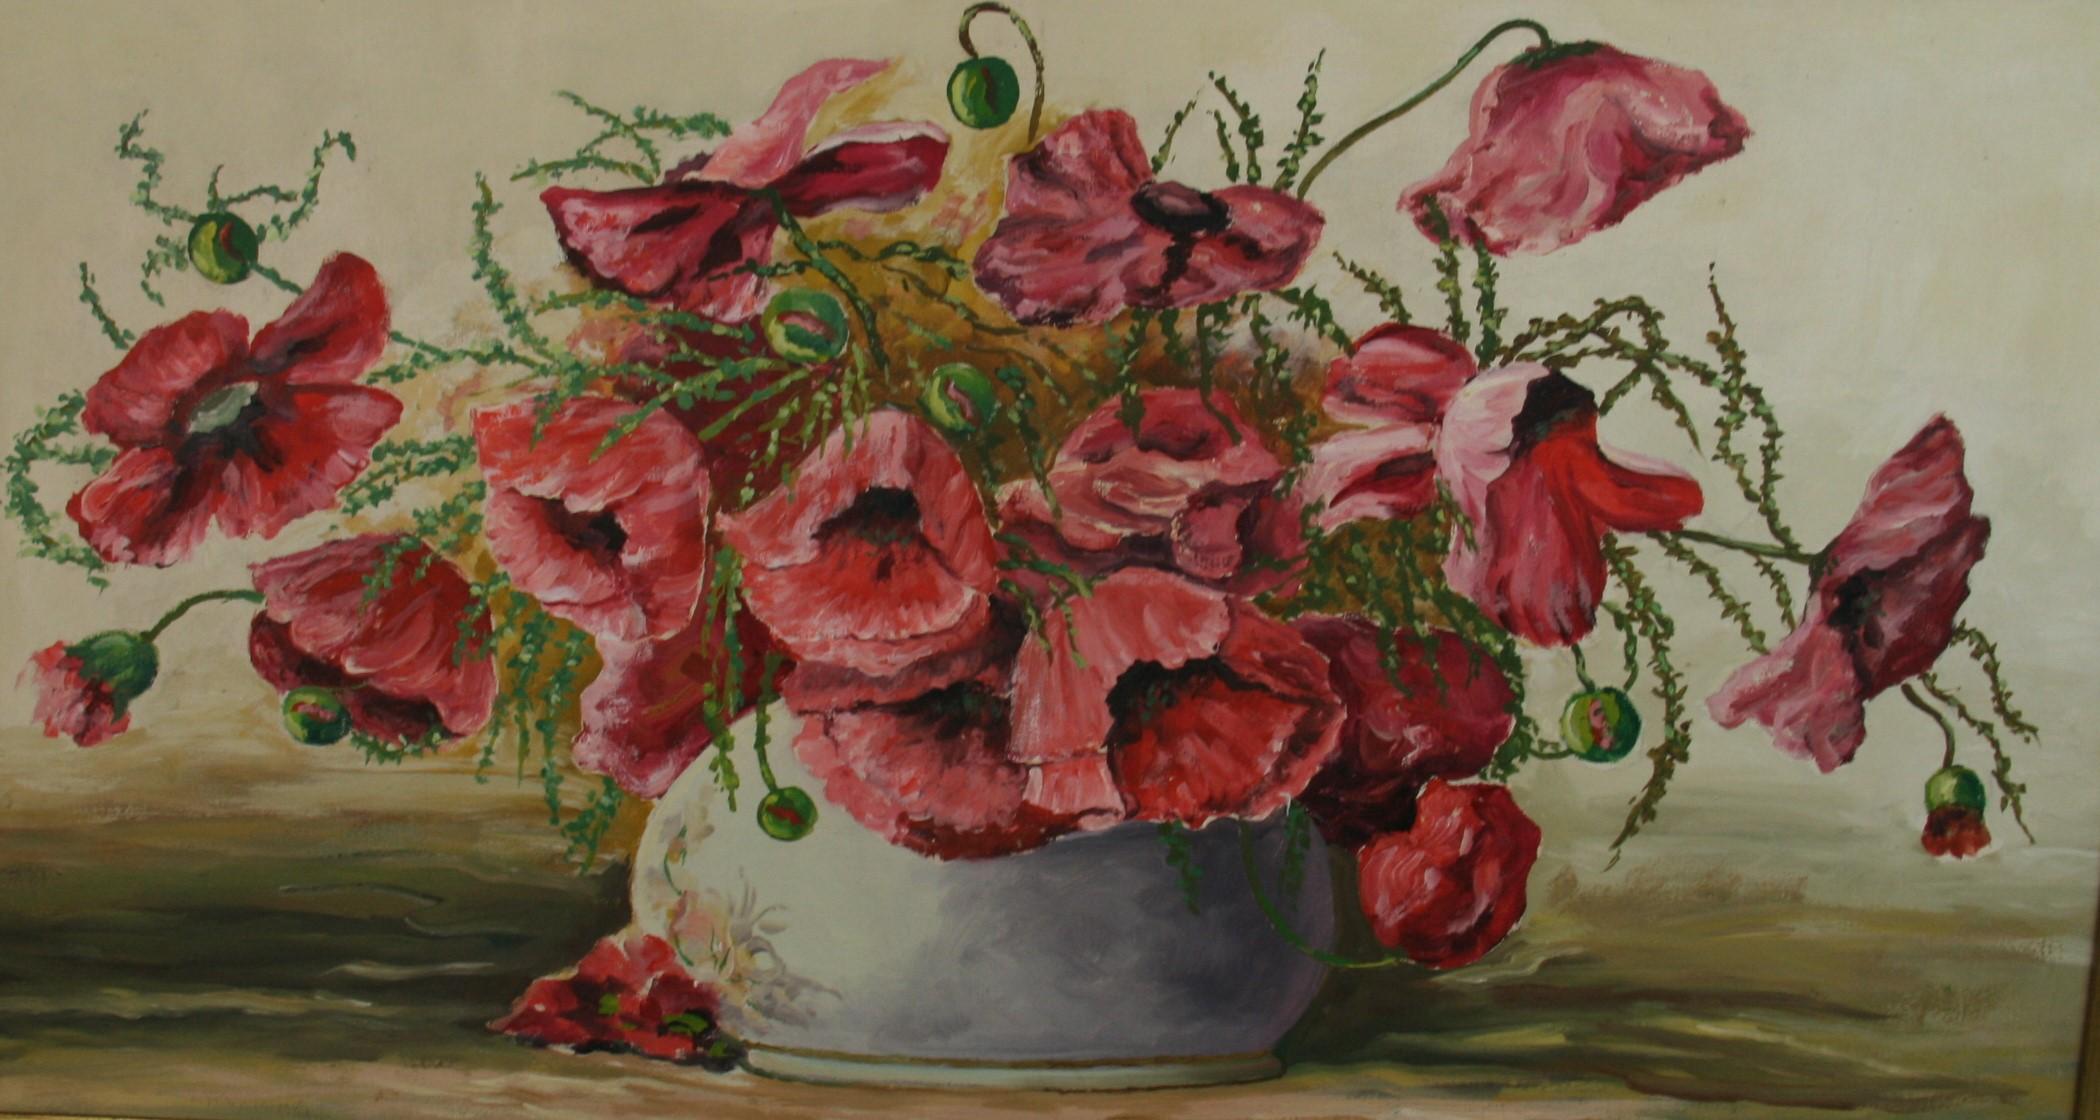 American Impressionist Oversized Bouquet of Poppies Still life Floral painting - Painting by Varna Dulgerow